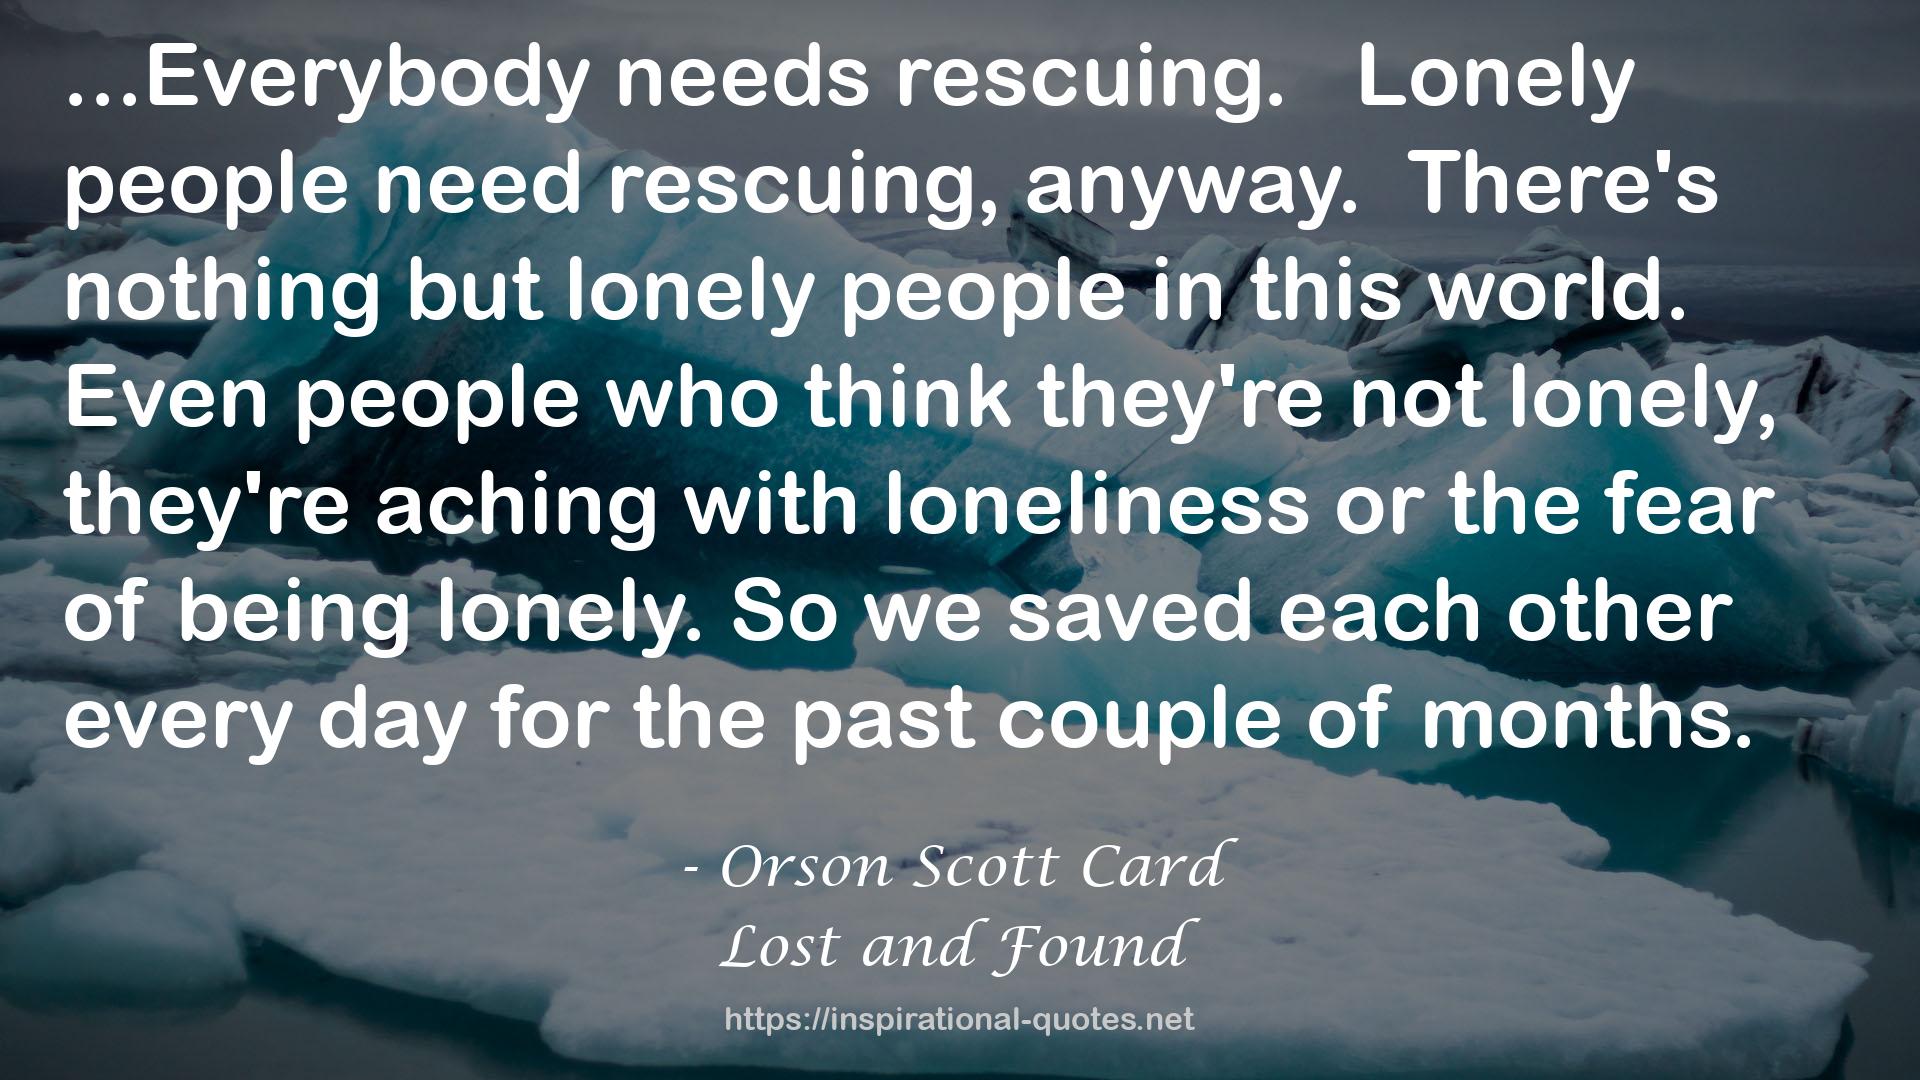 Lost and Found QUOTES